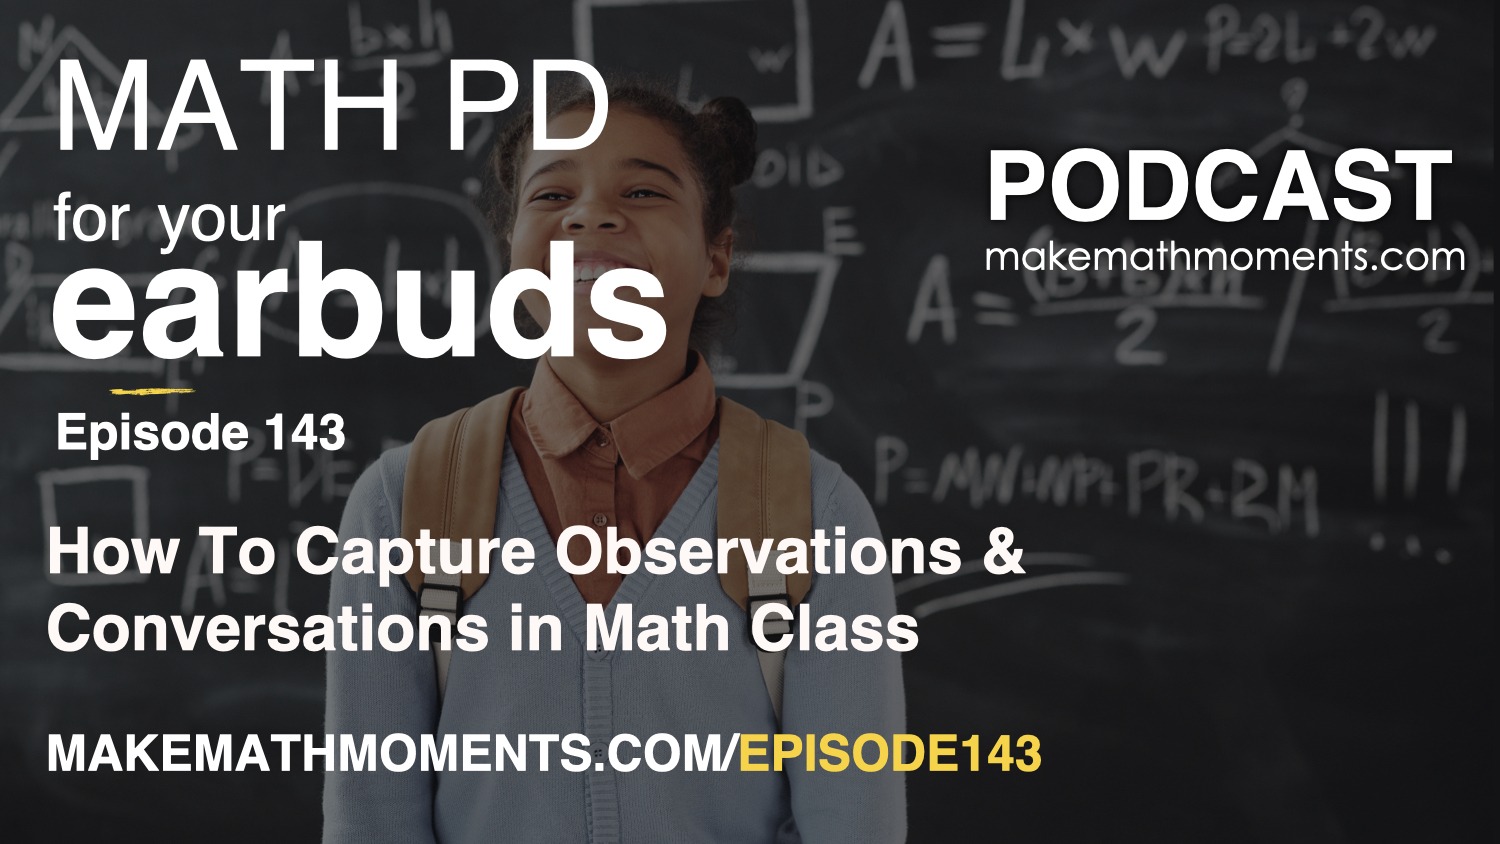 Episode 143: How To Capture Observations & Conversations in Math Class